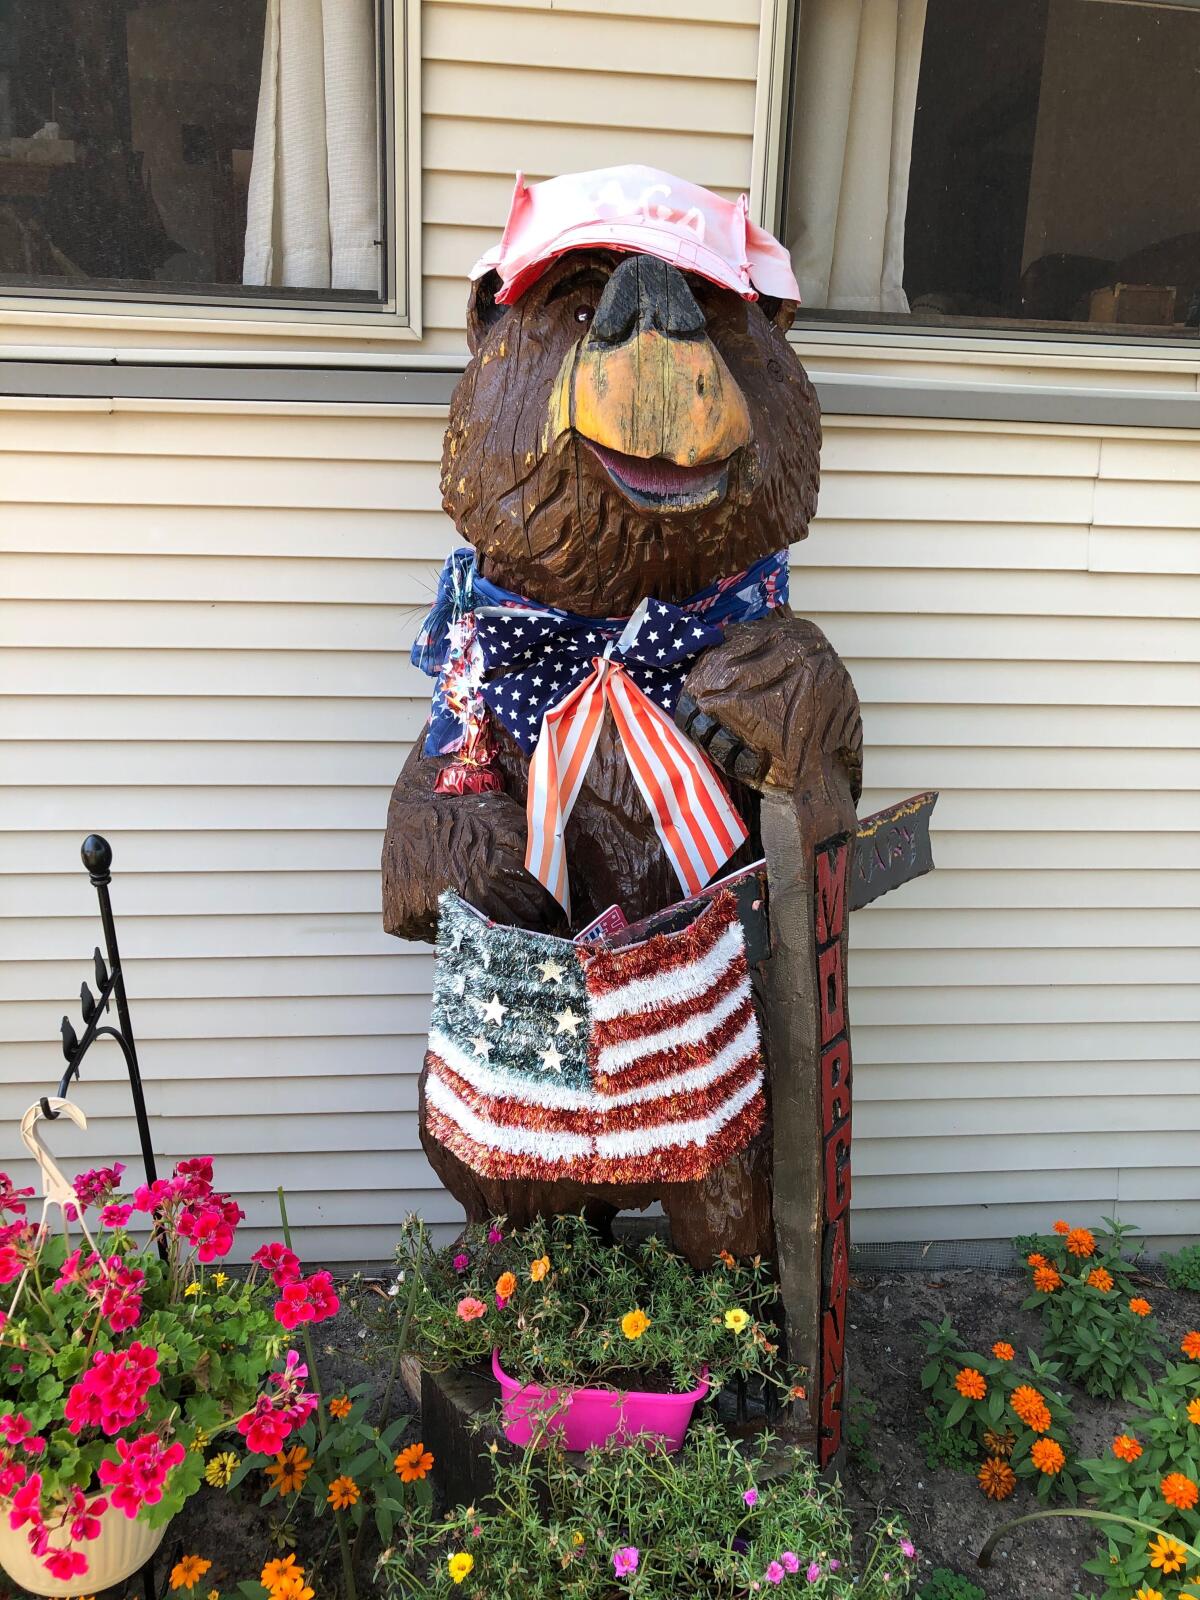 Mary Morgan and her neighbors both like to garden, and have added not just political signs but also lawn ornaments